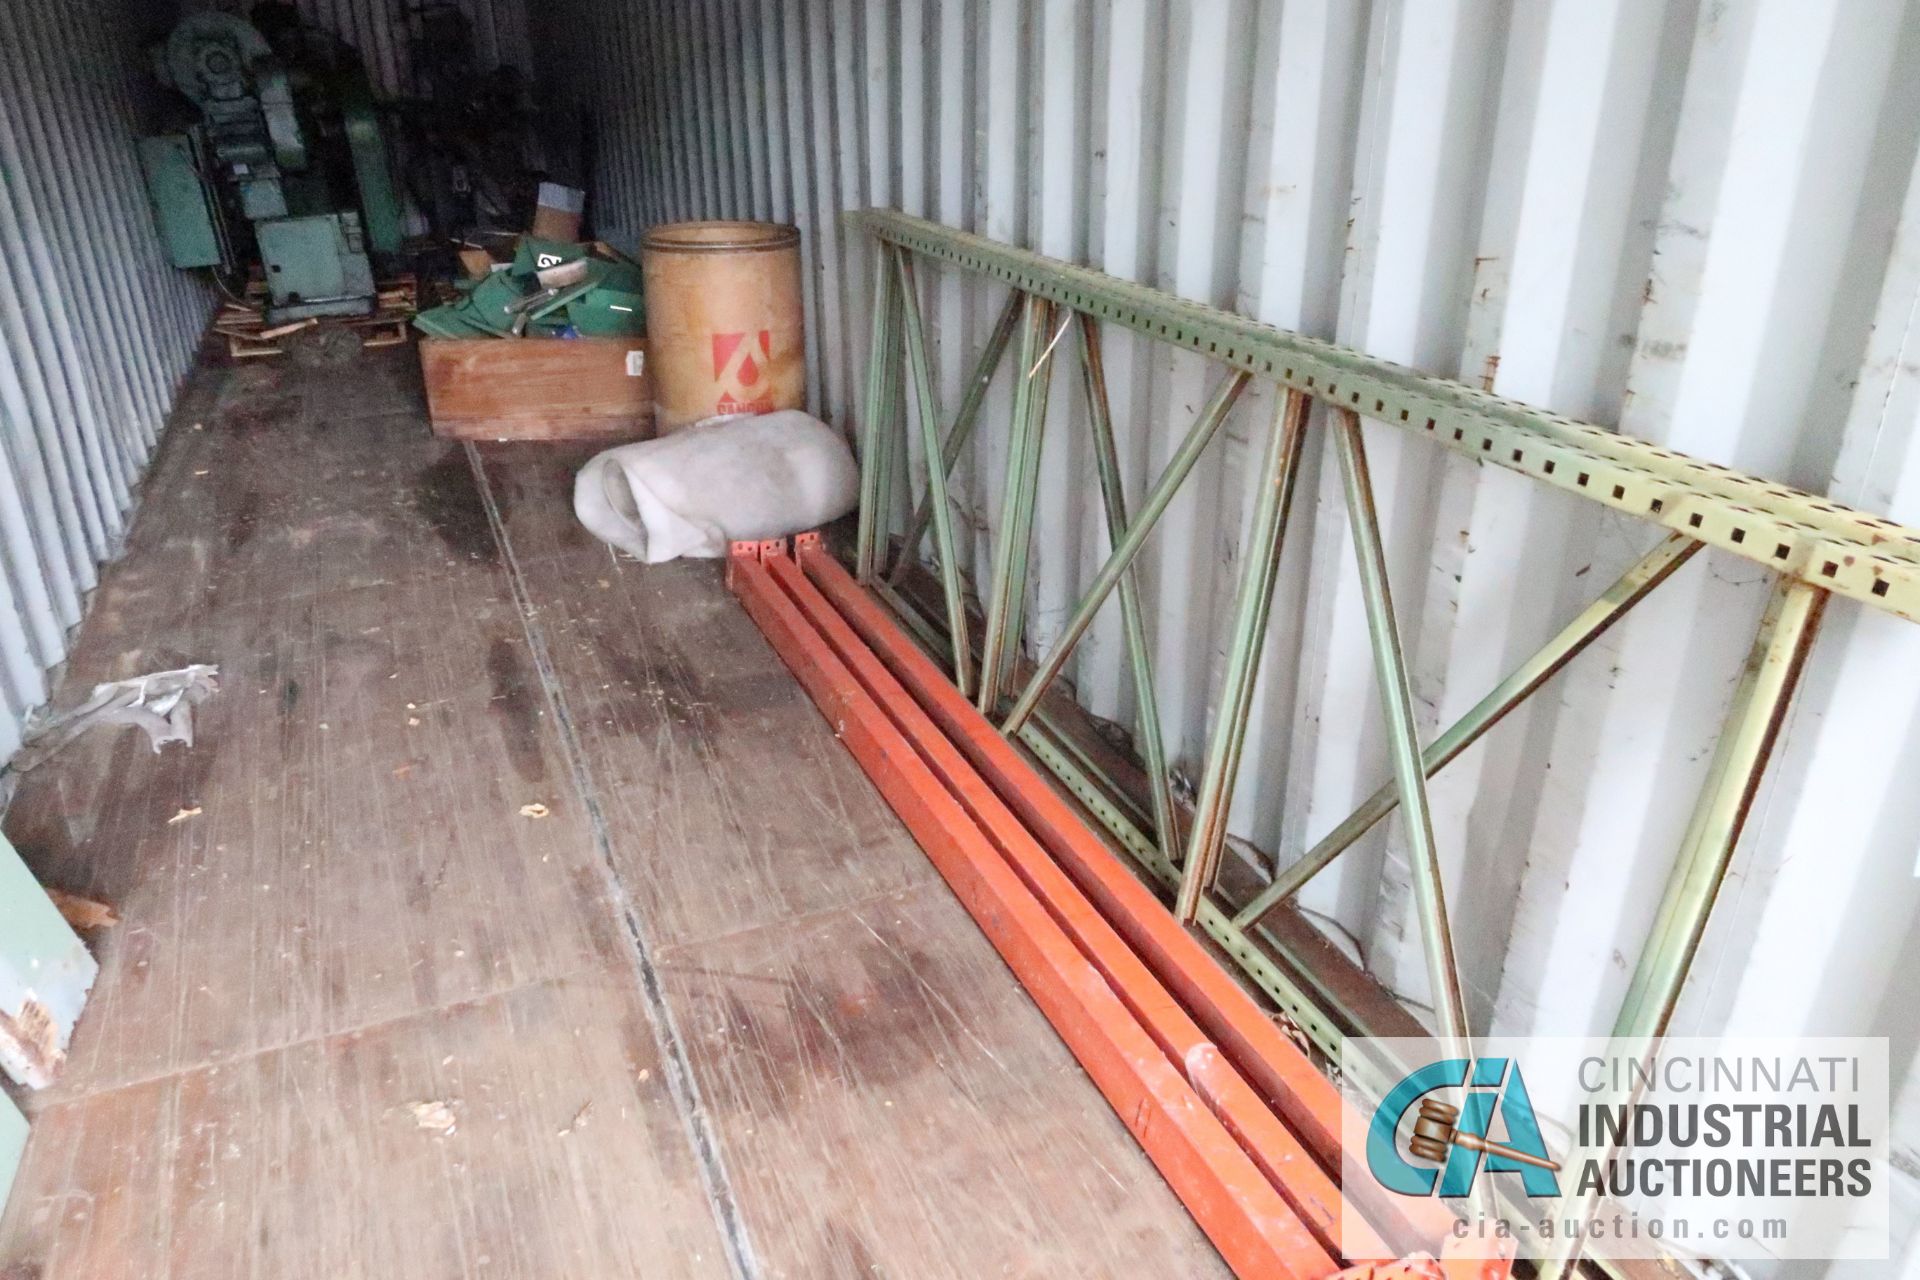 CONTENTS OF SEA CONTAINER - PALLET RACKING, SURFACE GRINDER, MACHINES, PARTS - SEE PHOTOS